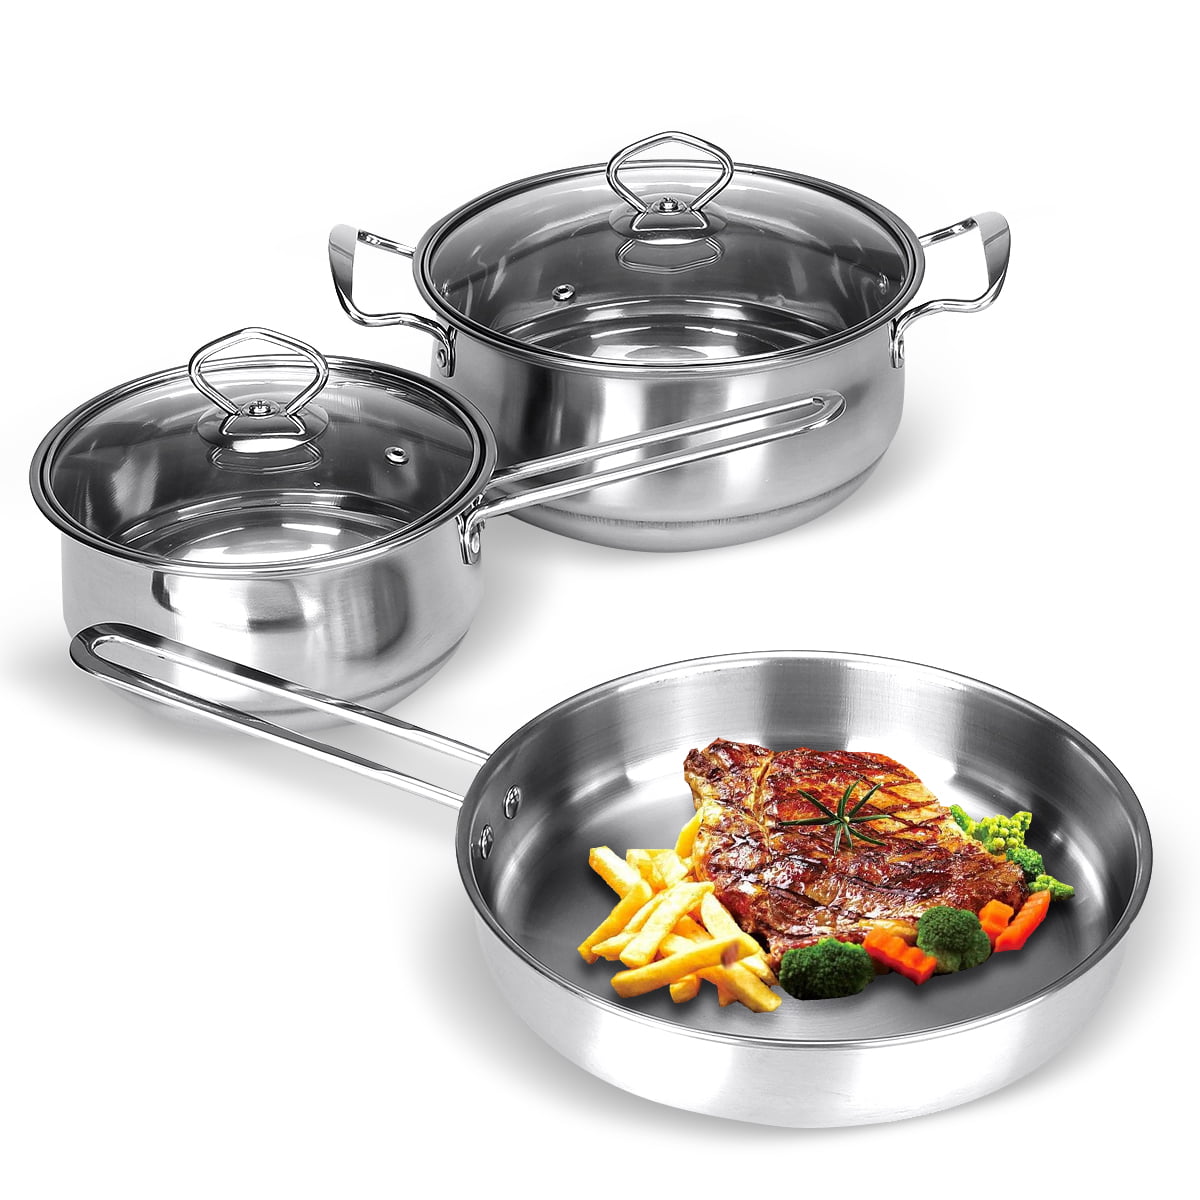 3-Piece Kitchen Cooking Cookware Set Stainless Steel Pots and Pans Set Cooking With Stainless Steel Cookware